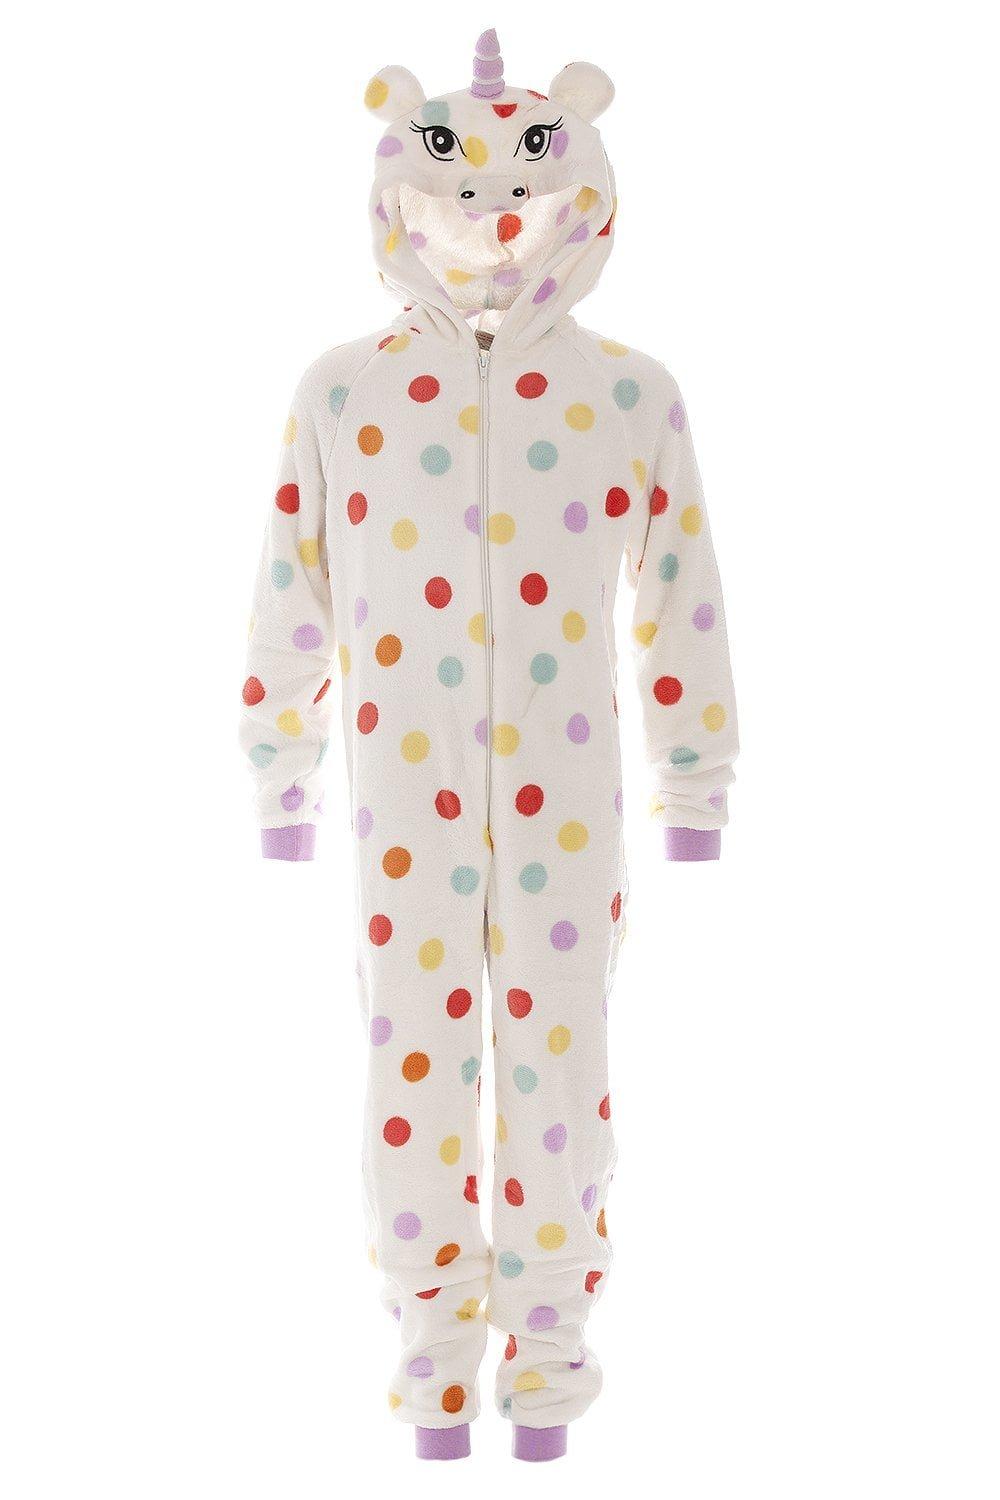 Supersoft Unicorn Mulitcoloured Polka Dot Hooded All In One Onesie